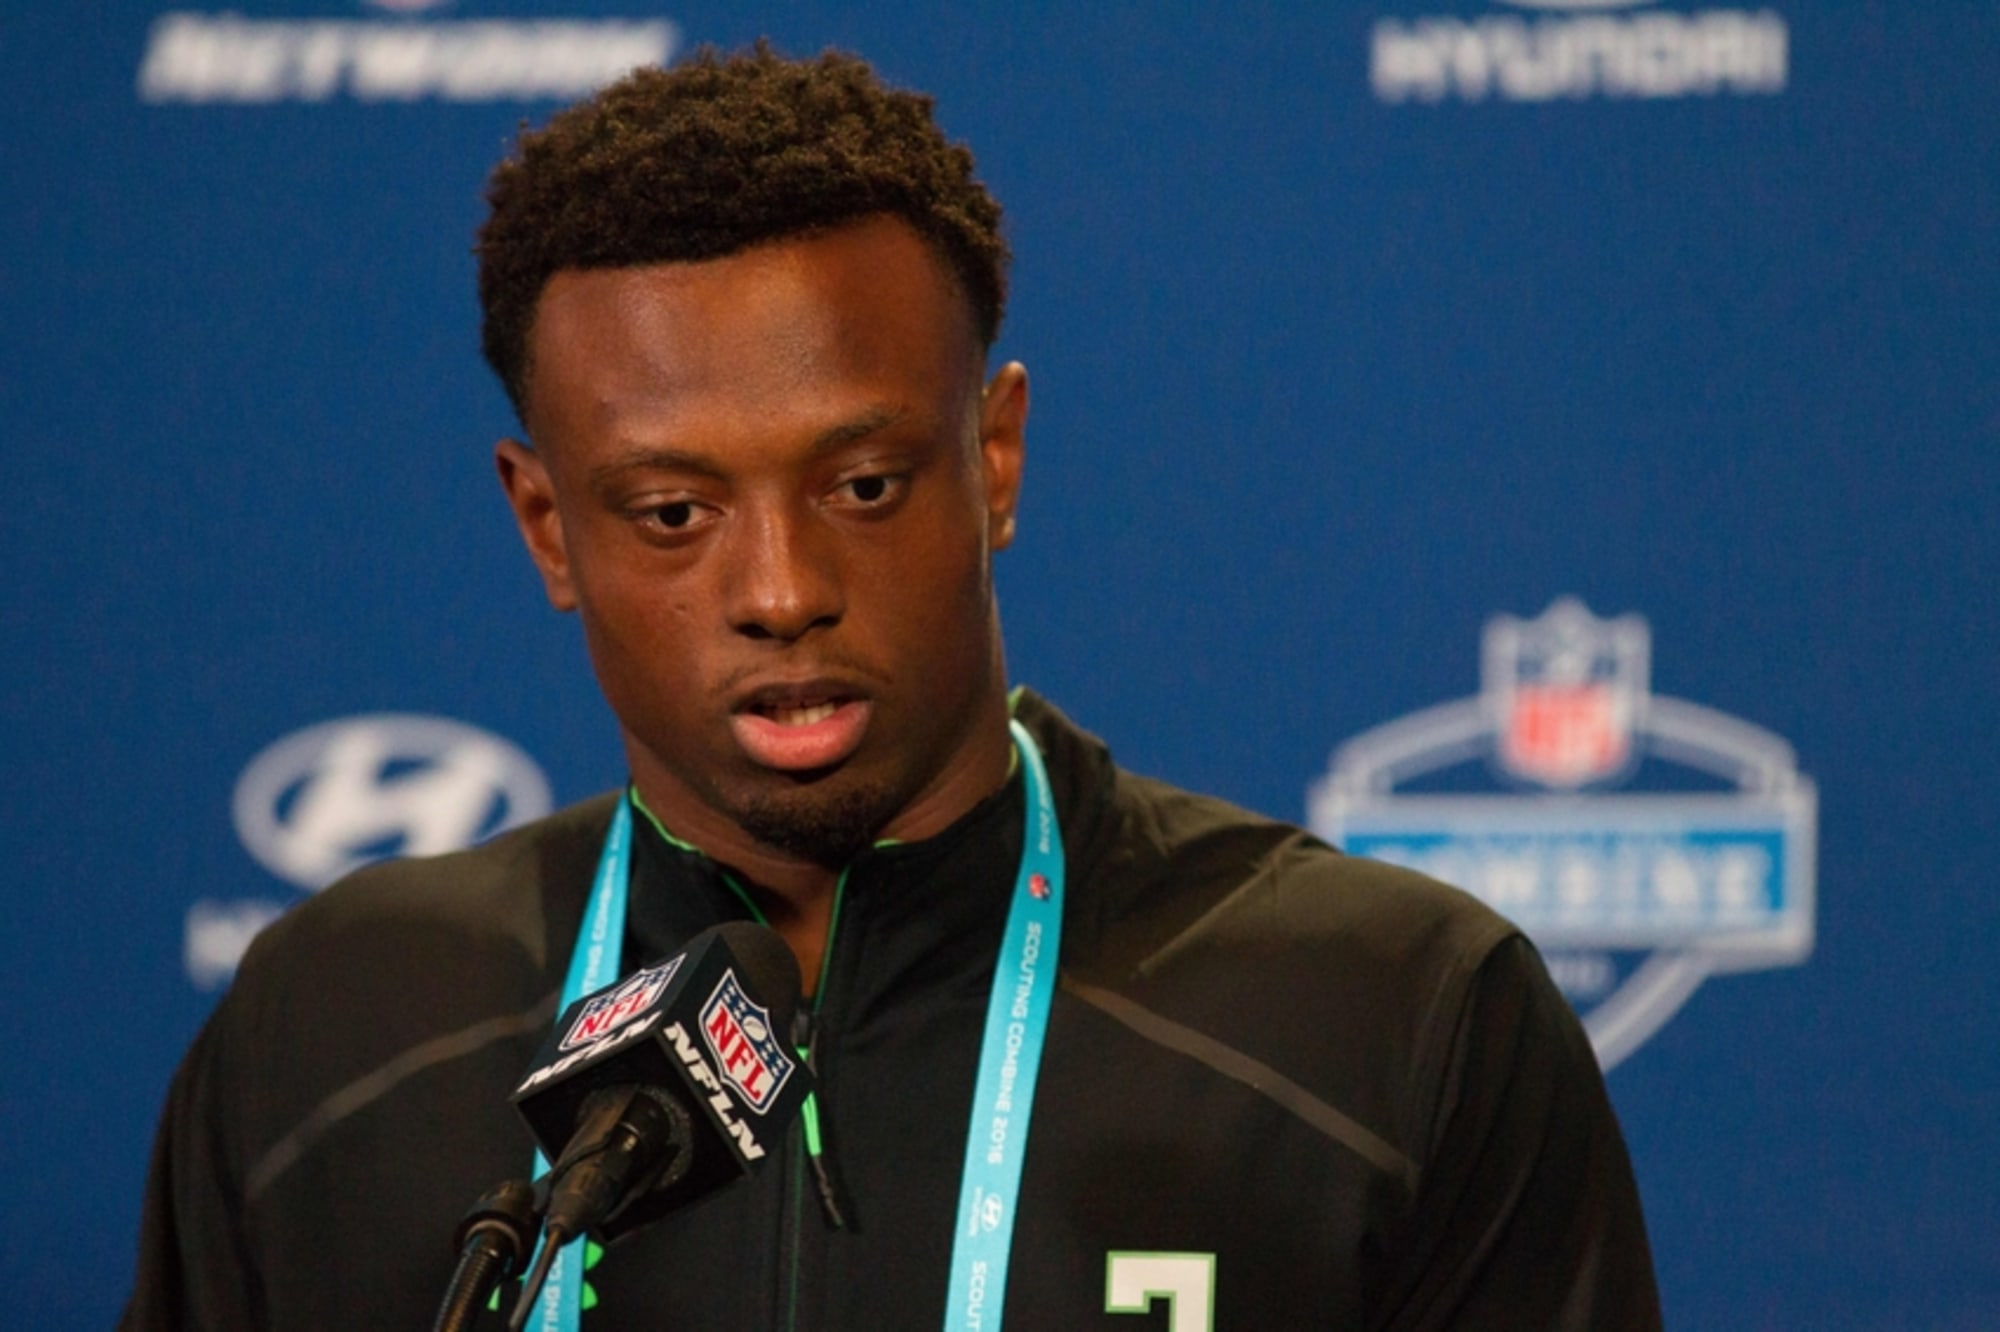 A scout says Eli Apple's cooking skills are a red flag in the NFL